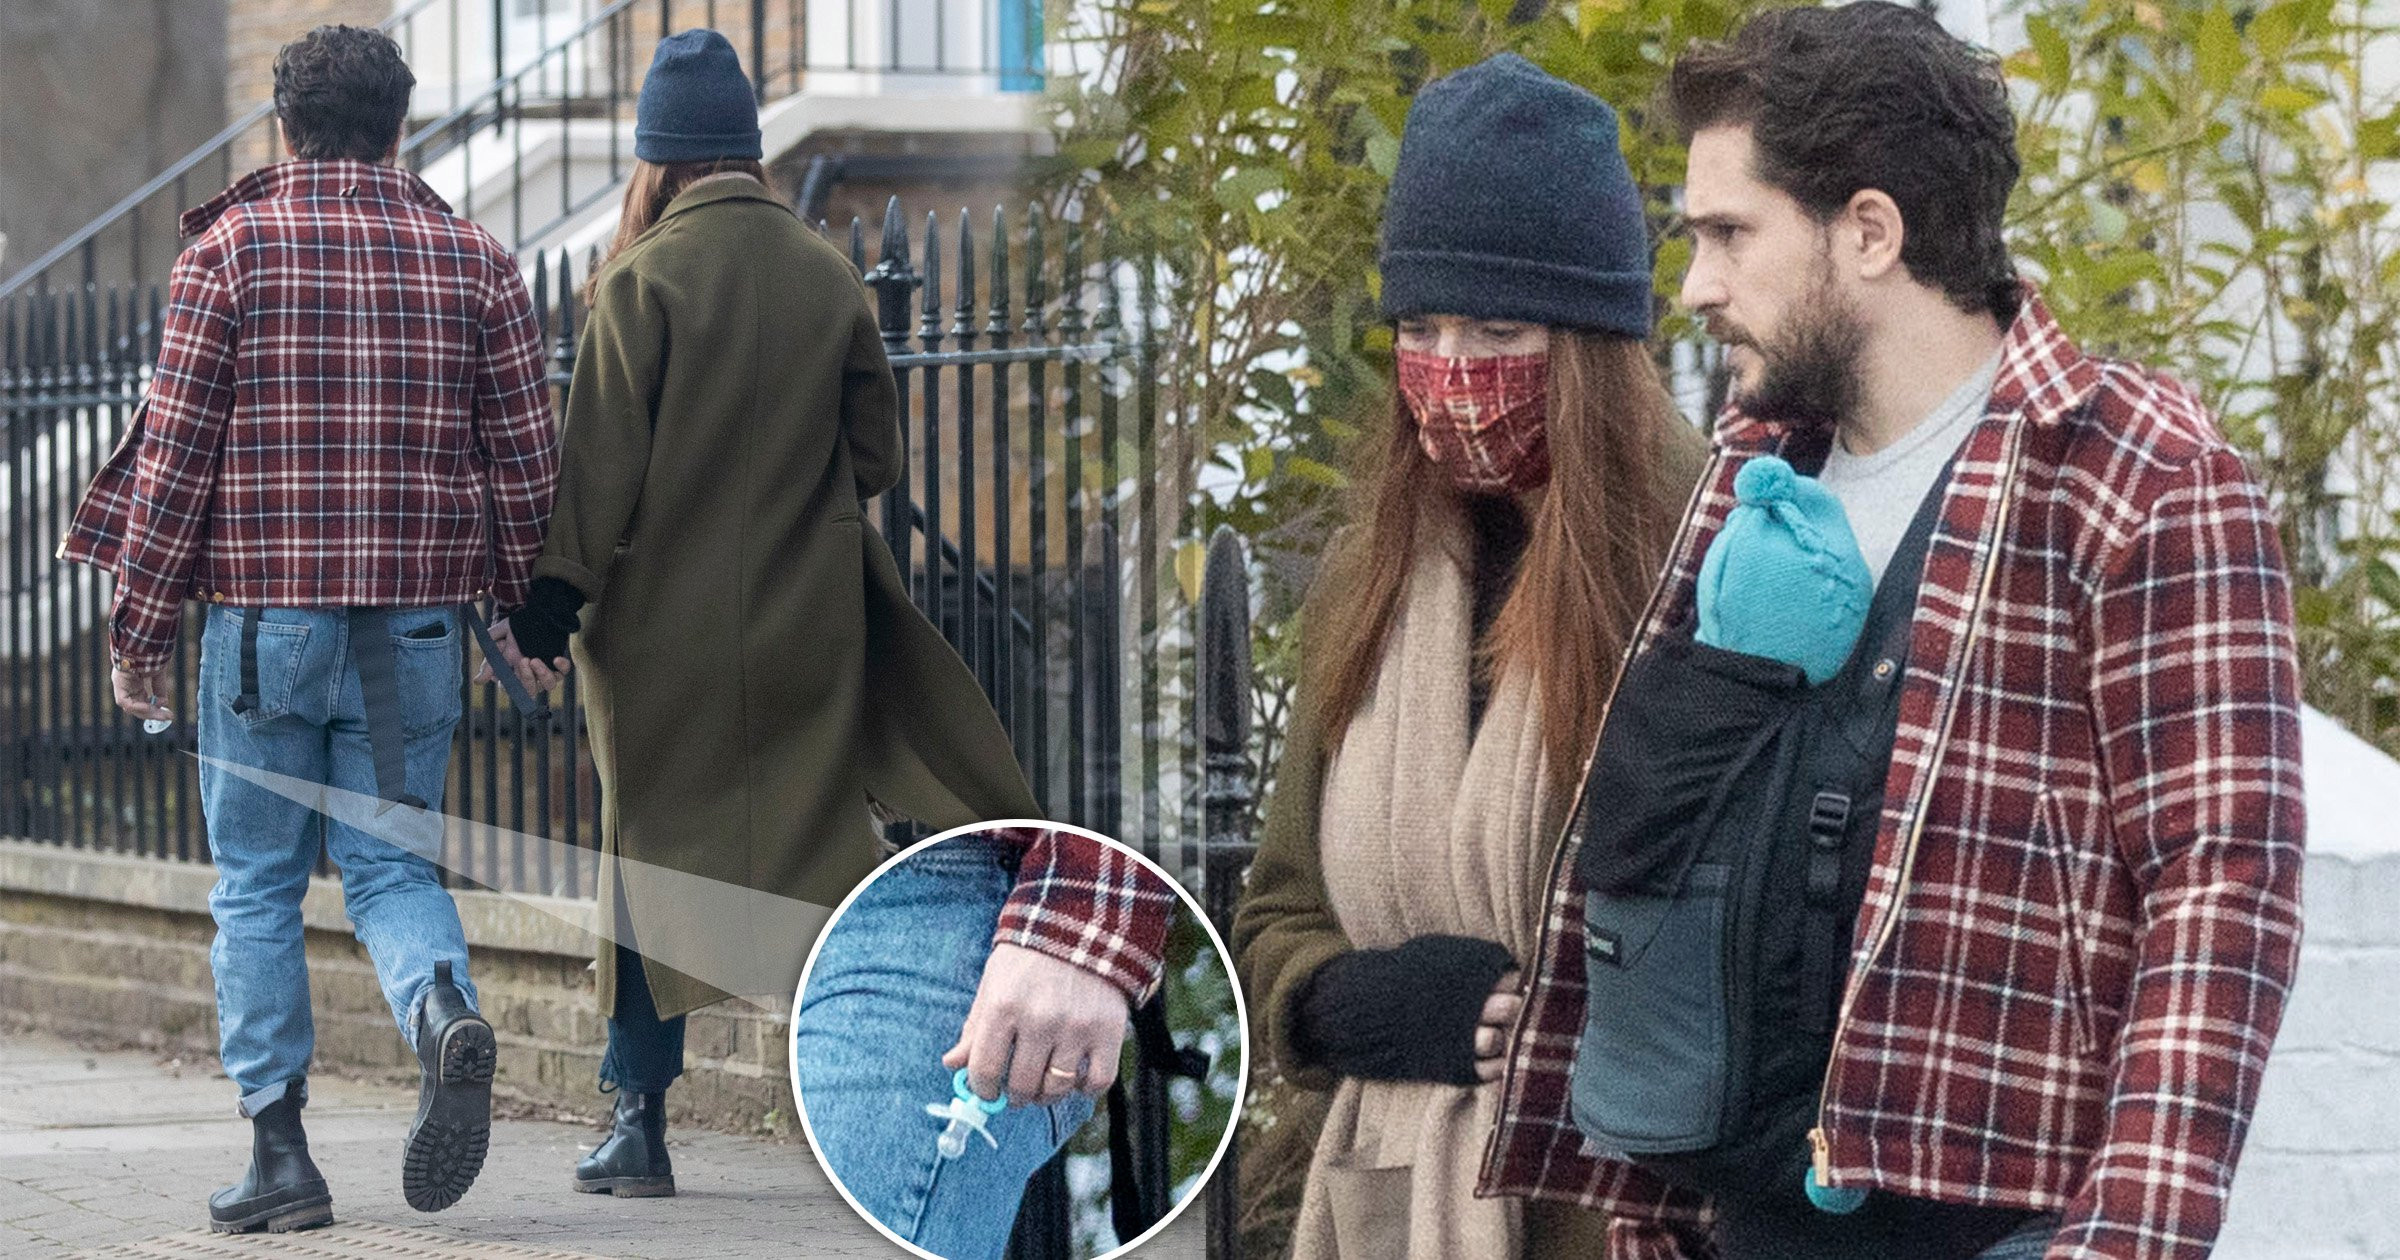 Game of Thrones stars Kit Harington and Rose Leslie enjoy low-key family stroll with baby boy